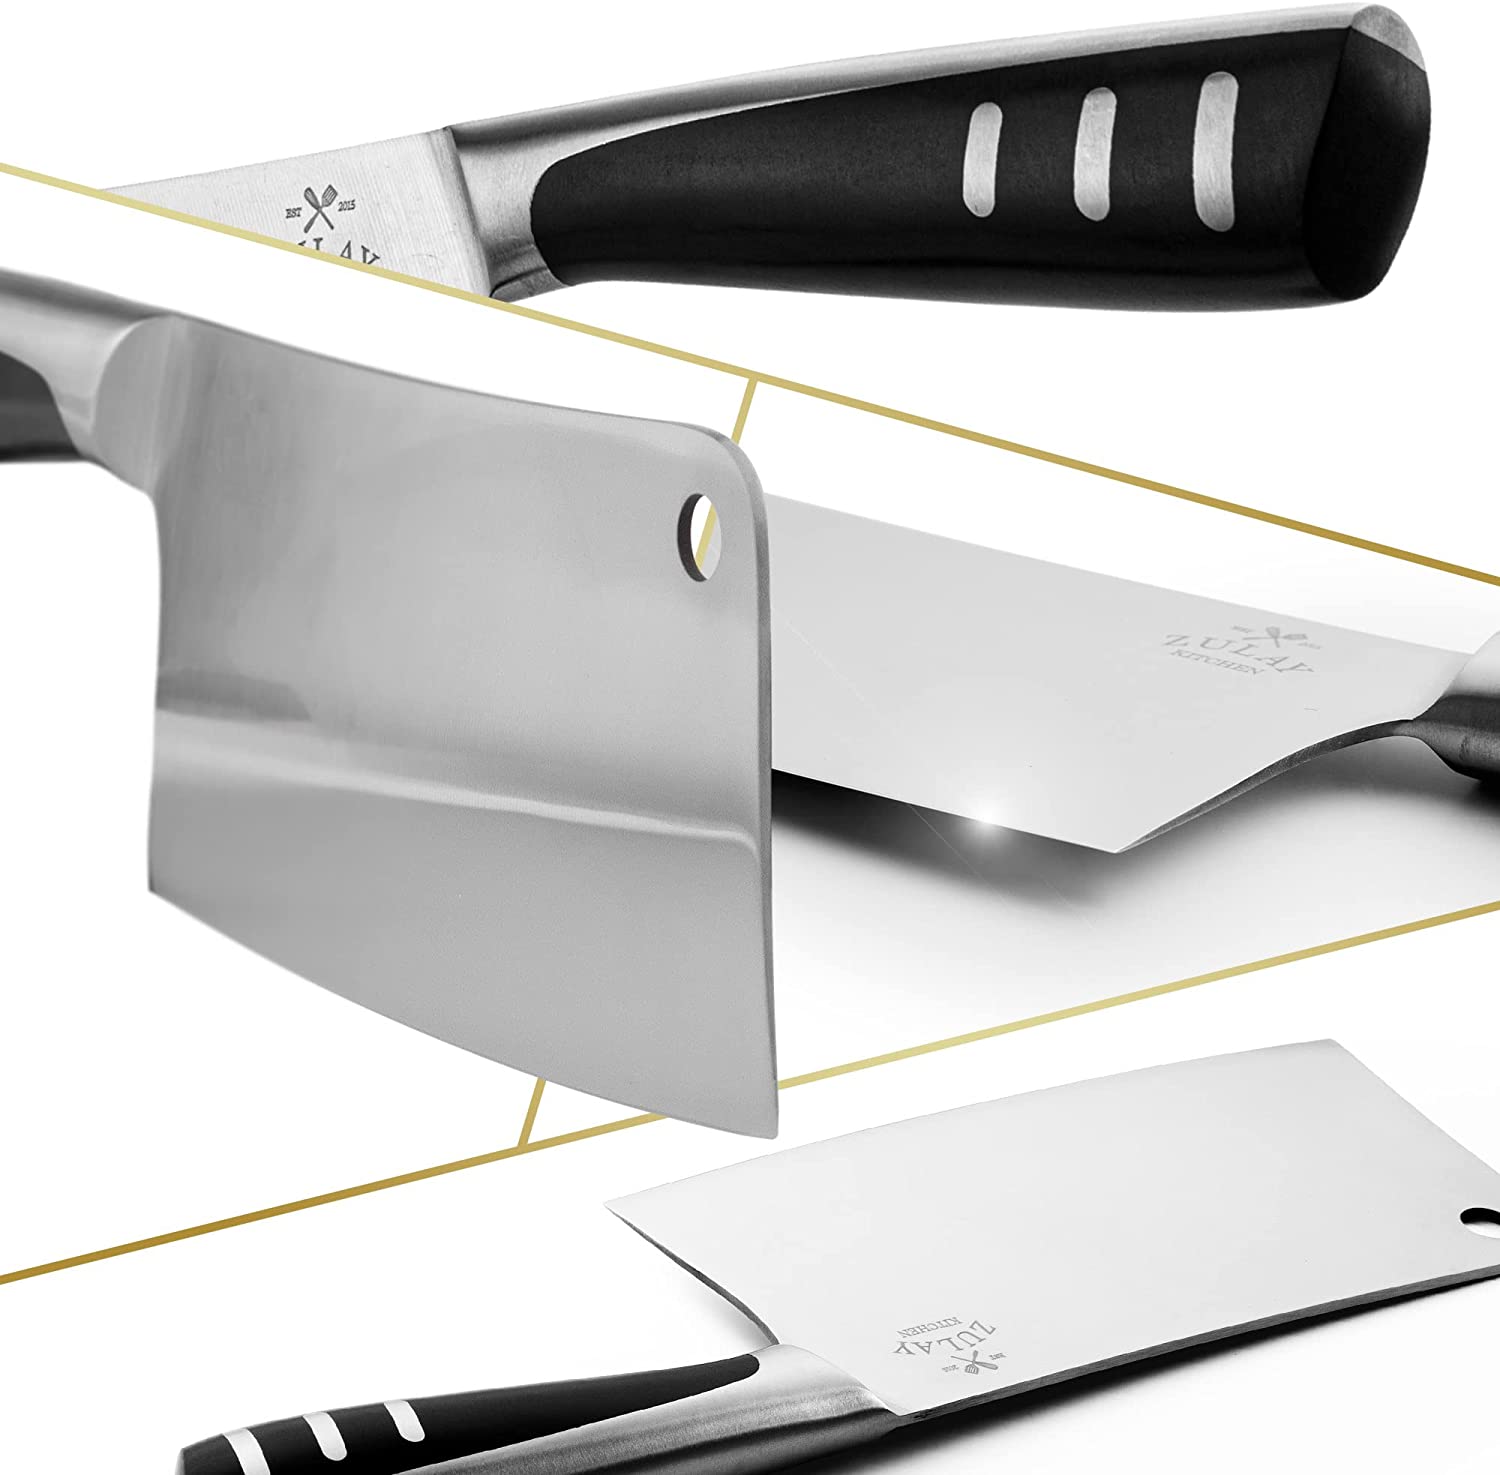 Meat Cleaver Butcher Knife - Zulay KitchenZulay Kitchen